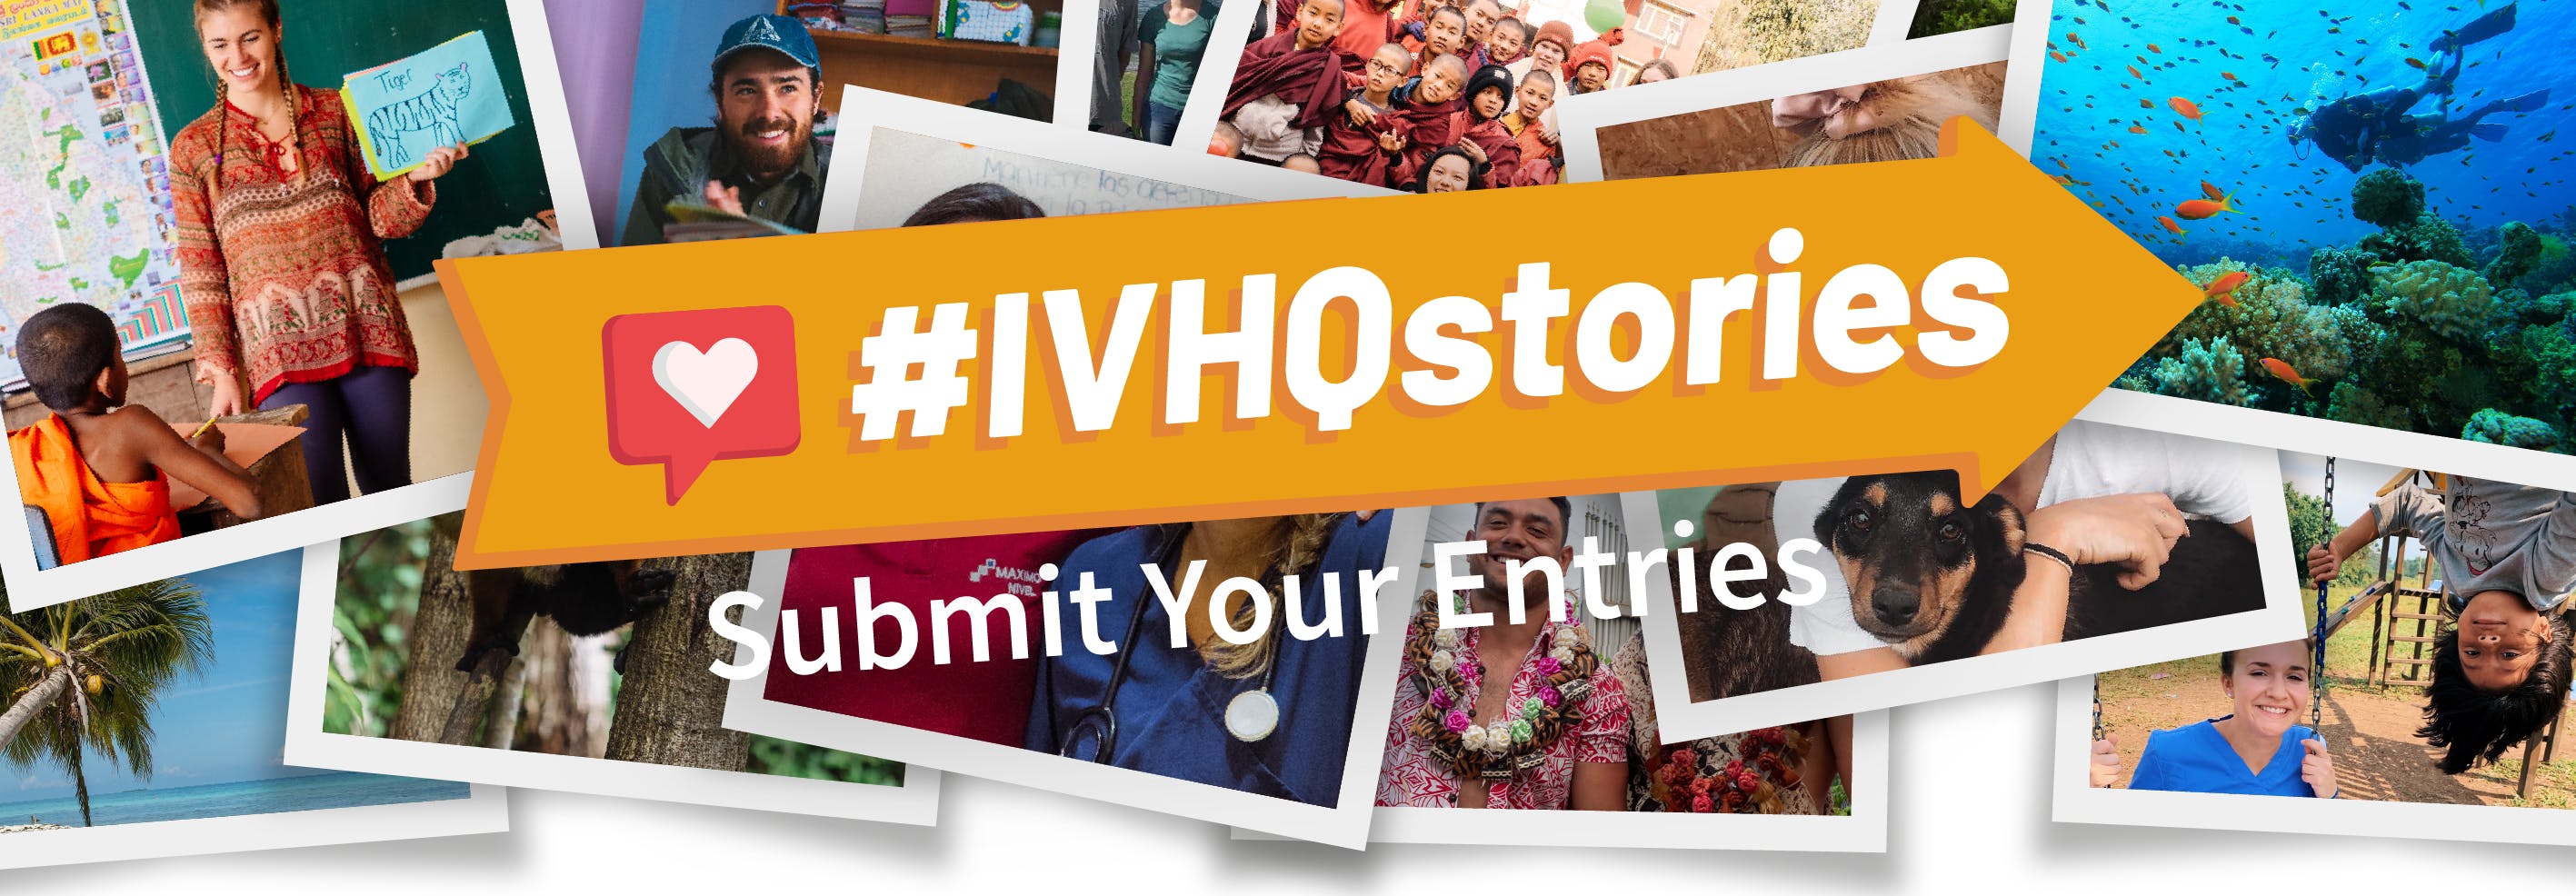 IVHQ Photo Competition - IVHQer